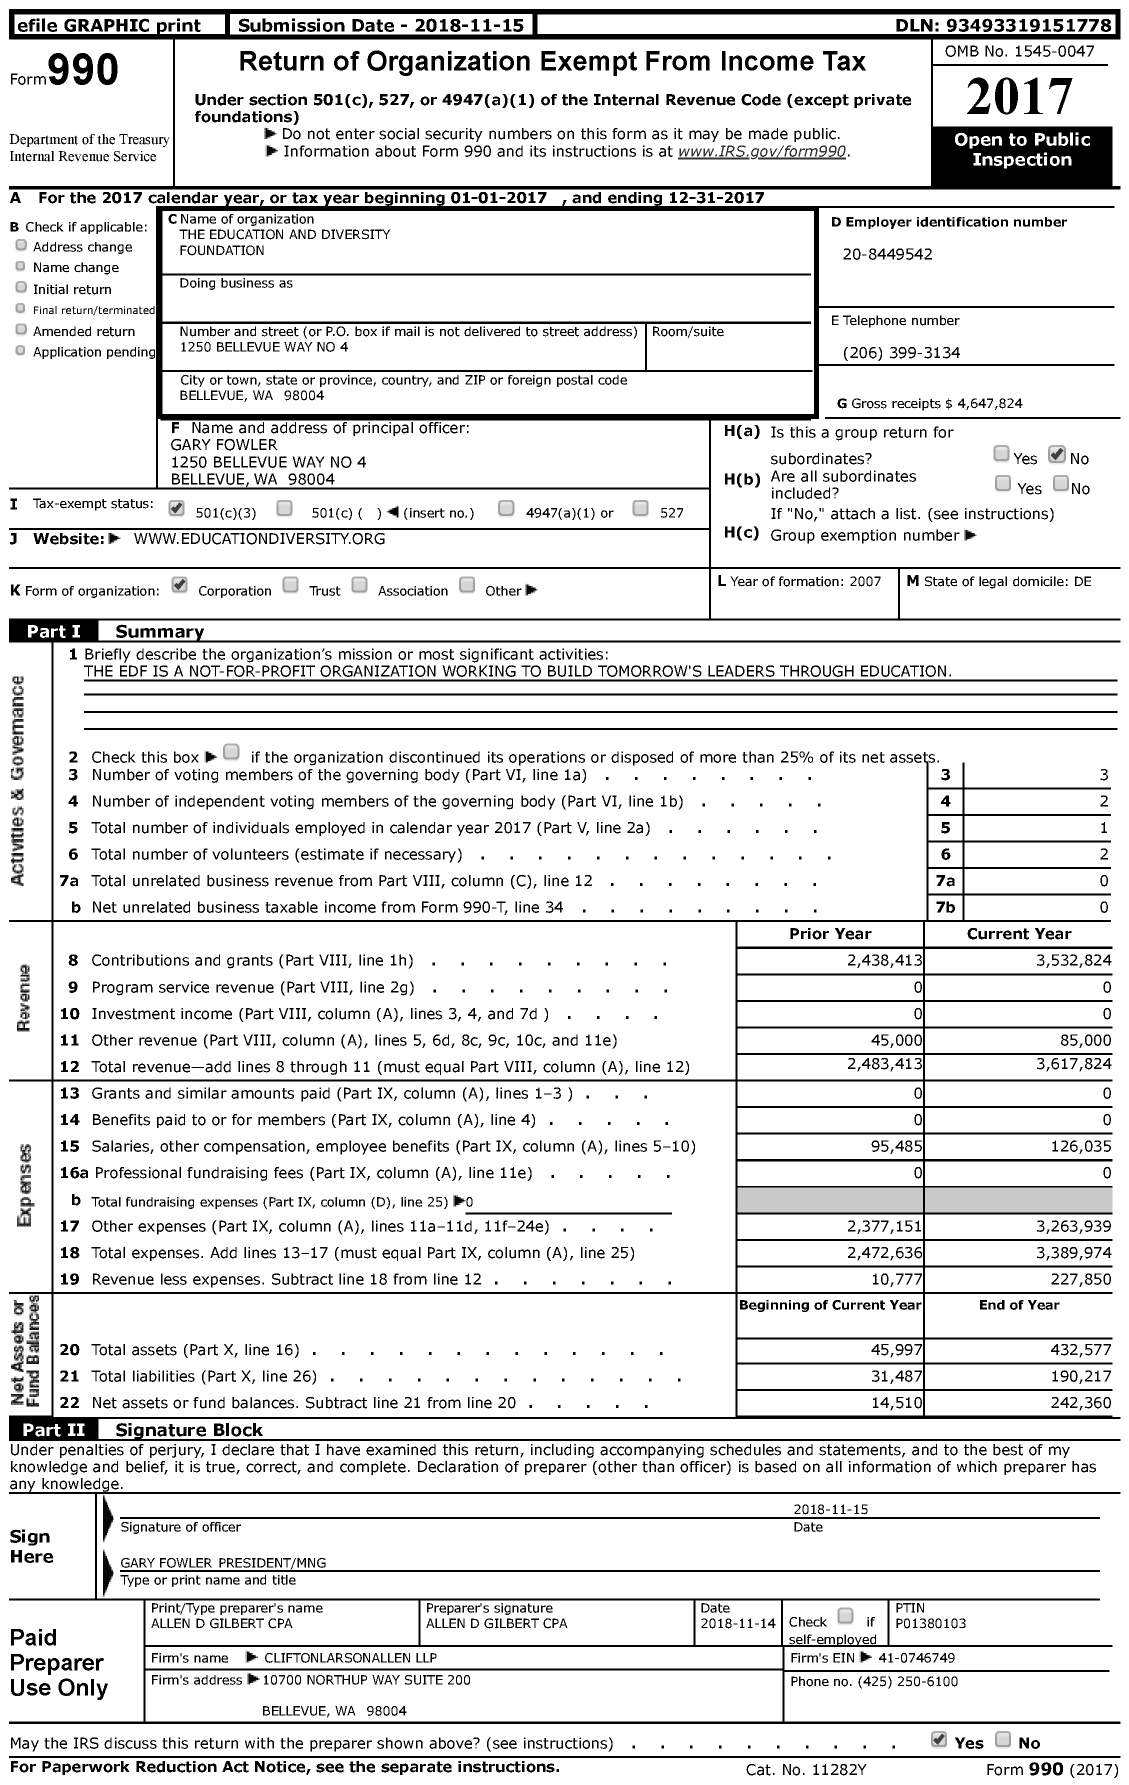 Image of first page of 2017 Form 990 for Education and Diversity Foundation (EDF)